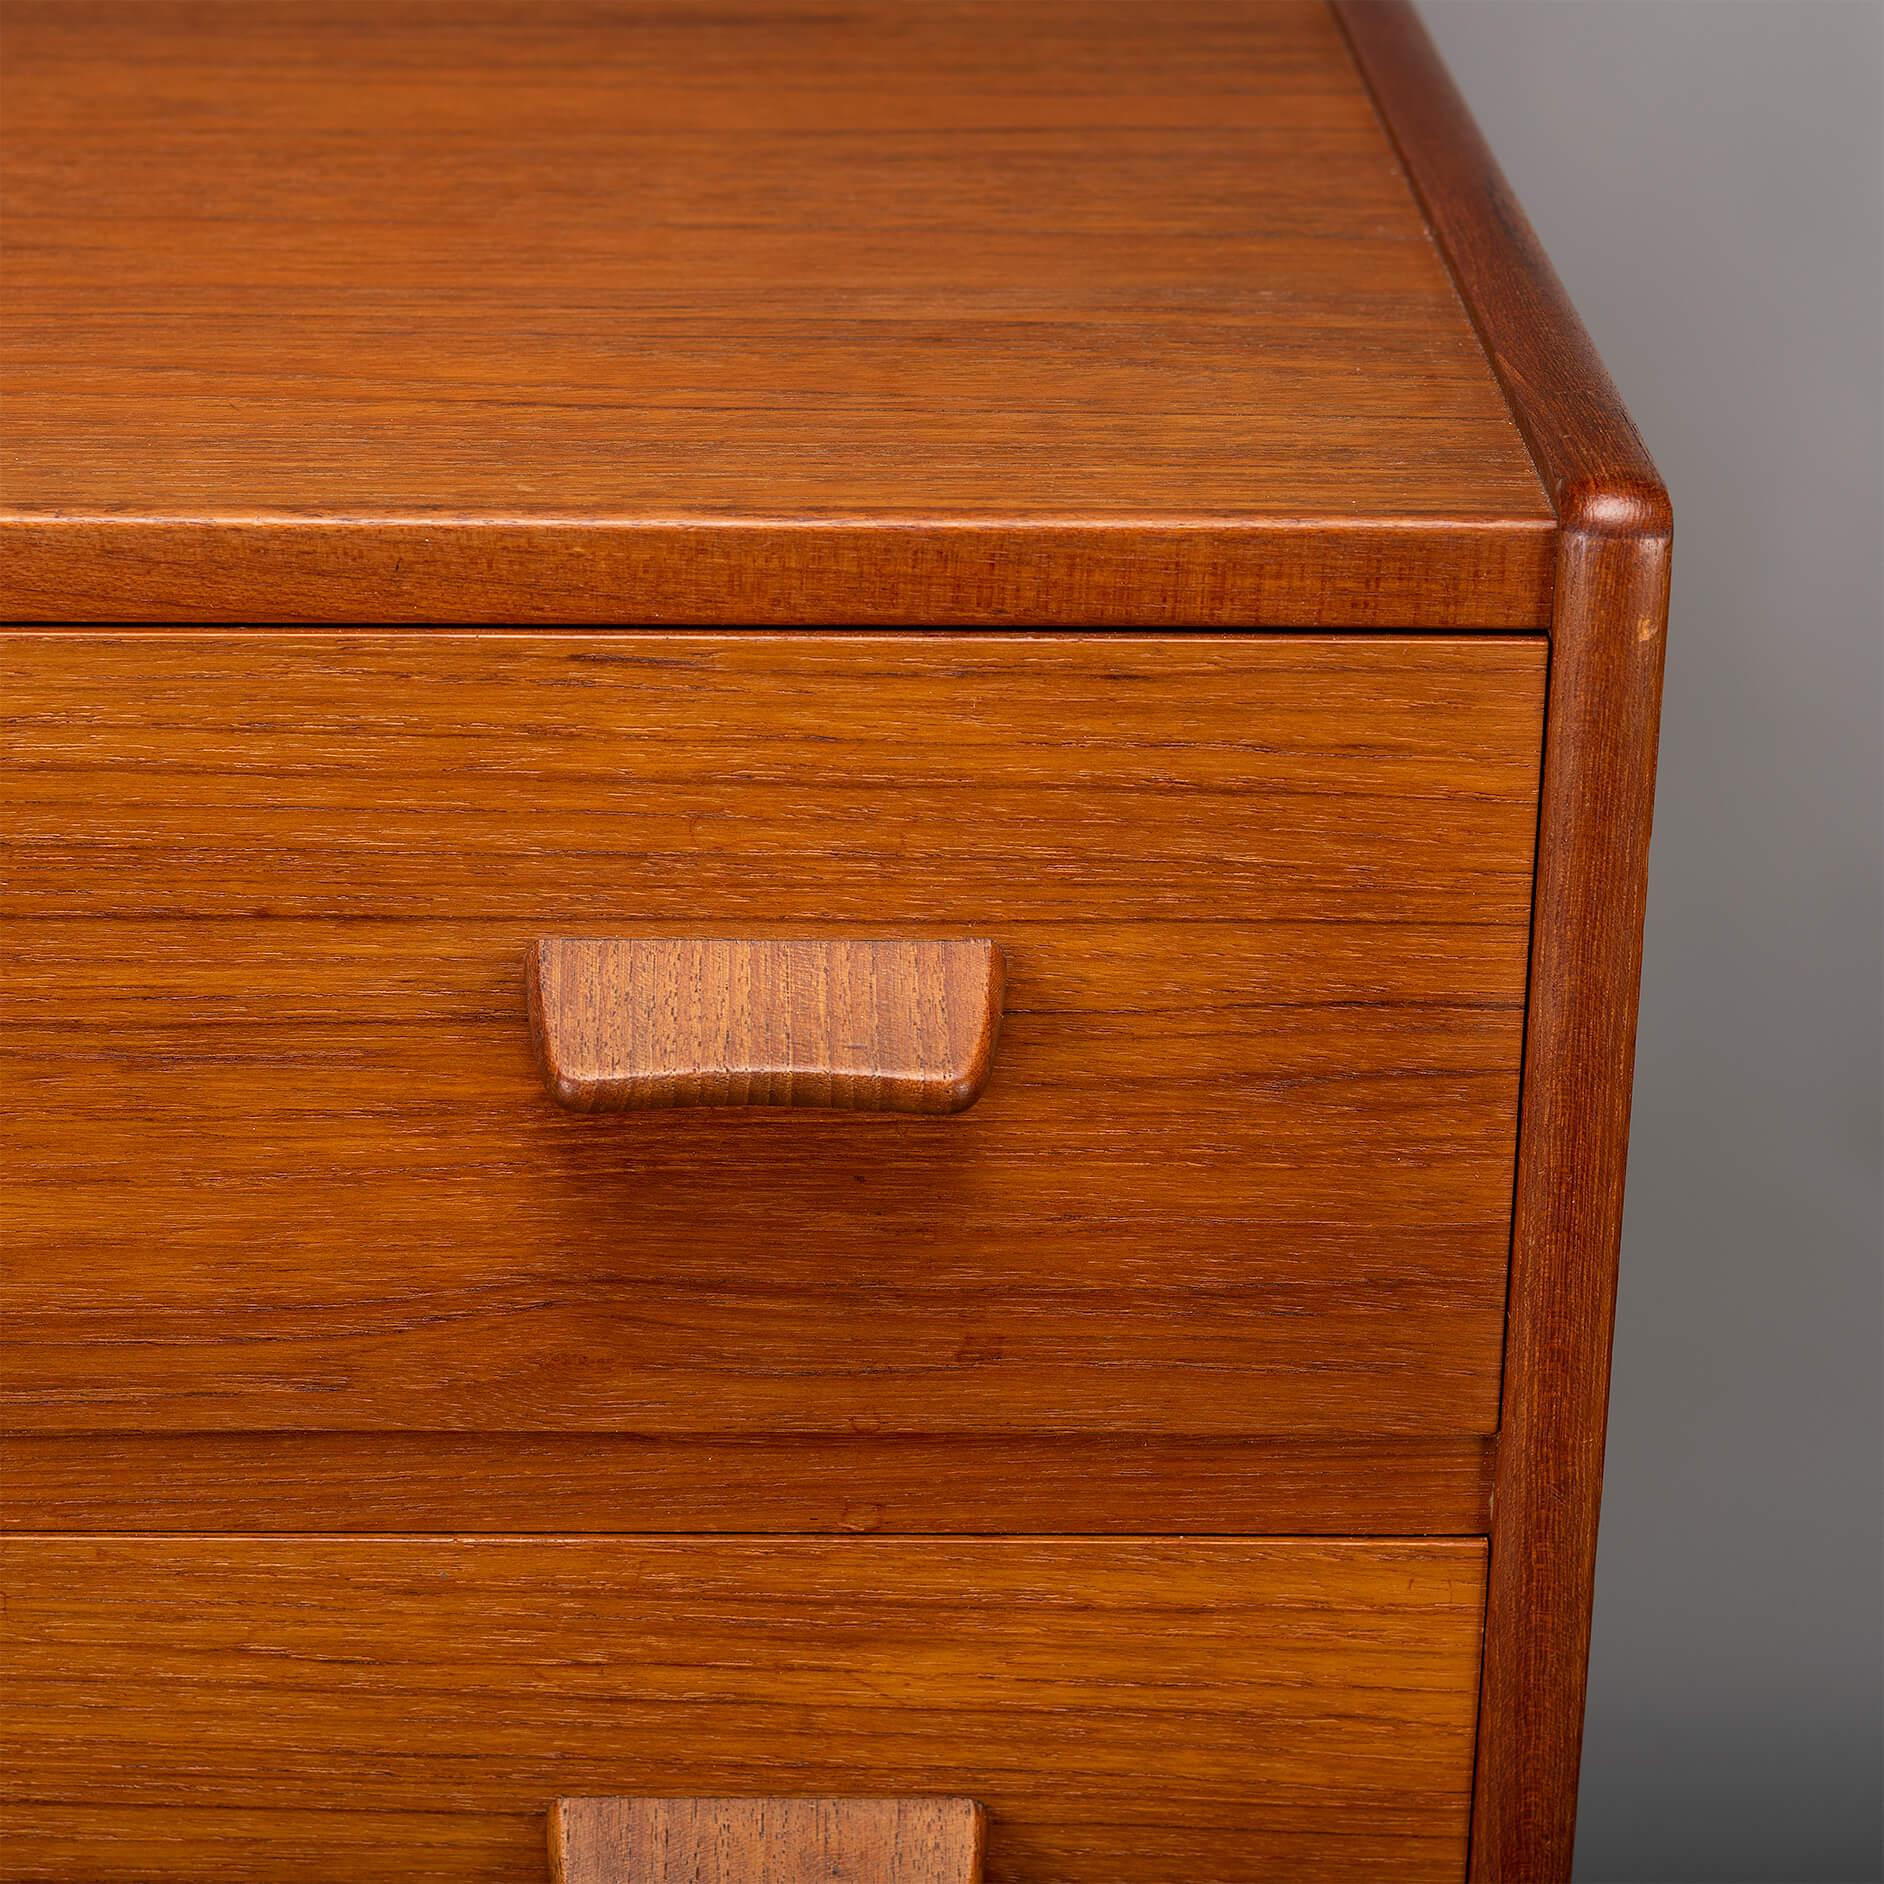 Mid-20th Century Danish Design Teak Chest of Drawers by Munch, 1960s For Sale